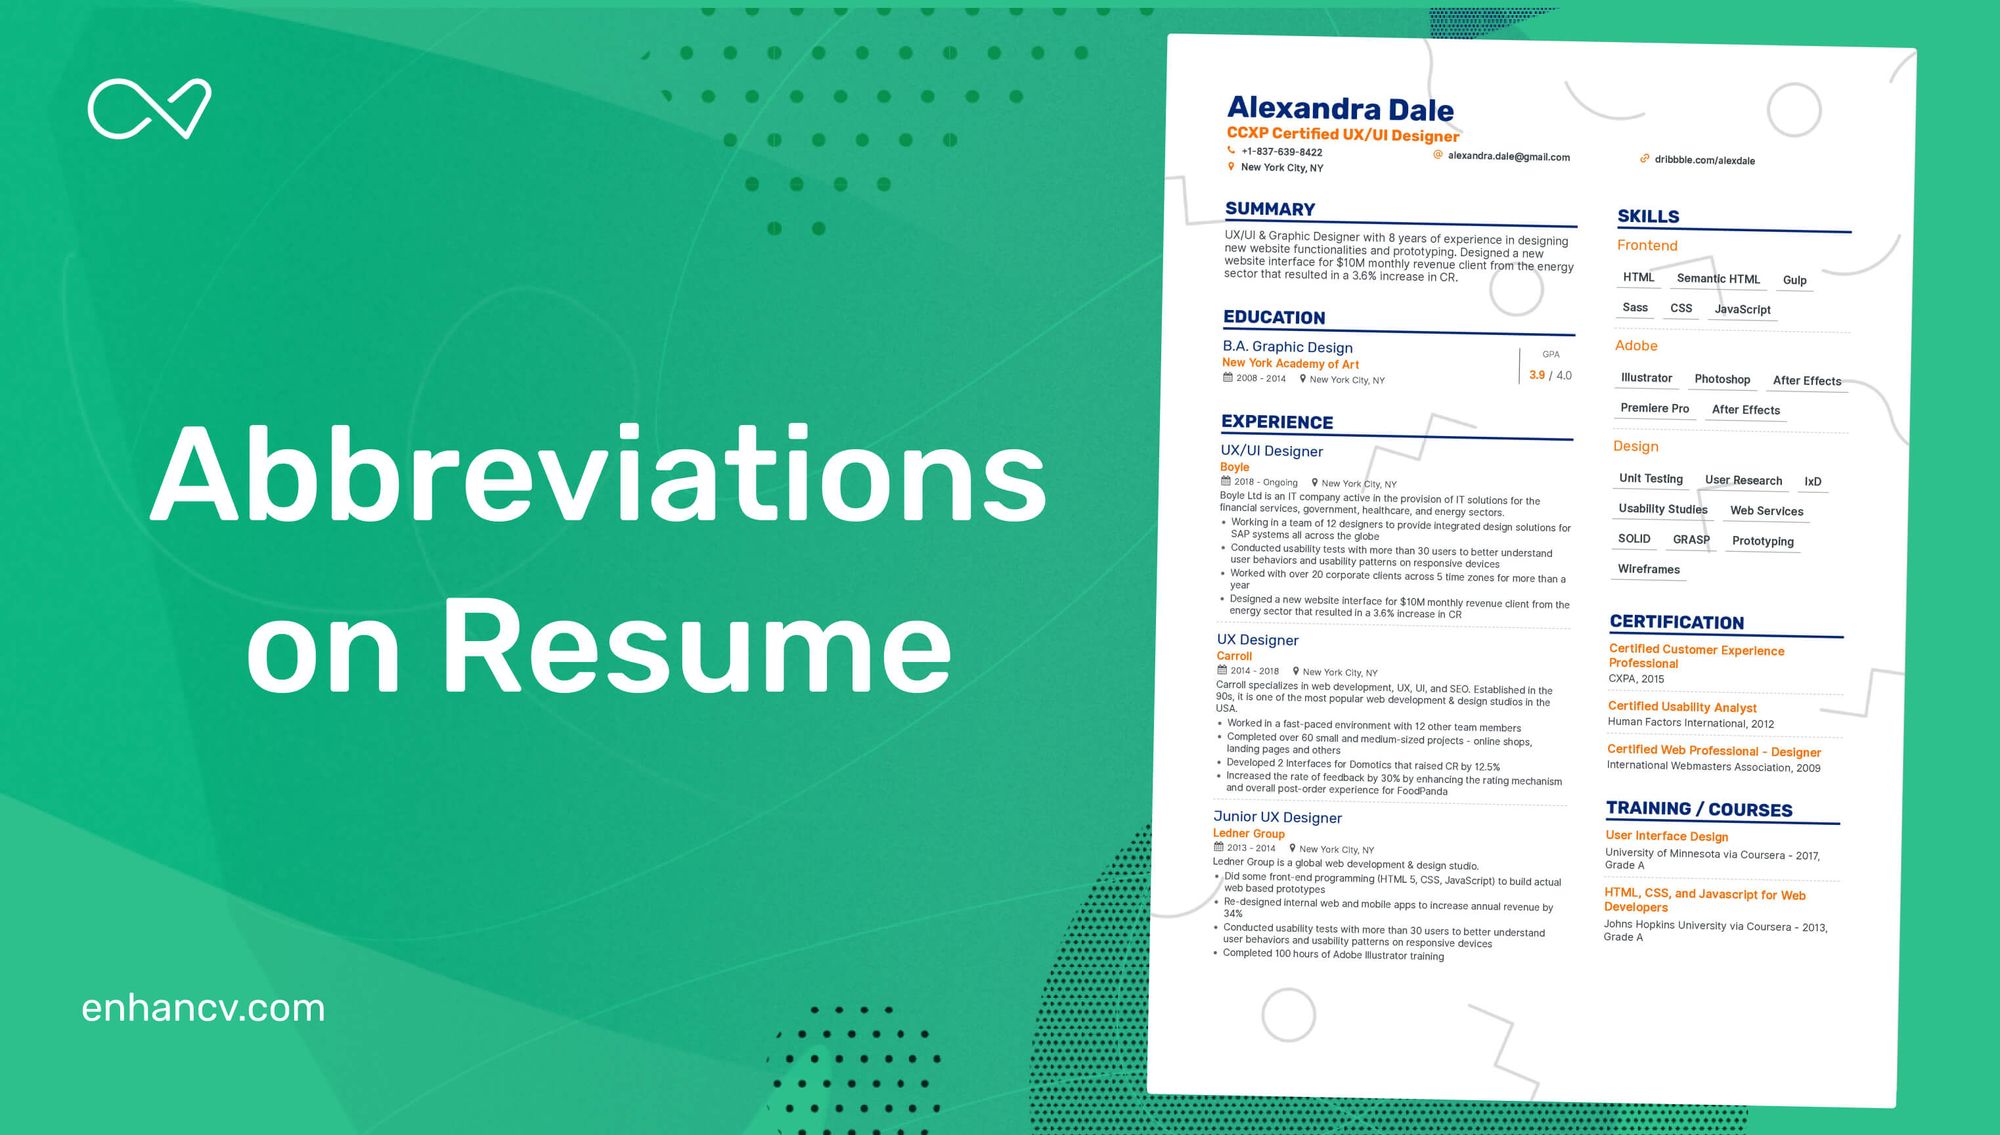 How to Use Abbreviations on Your Resume